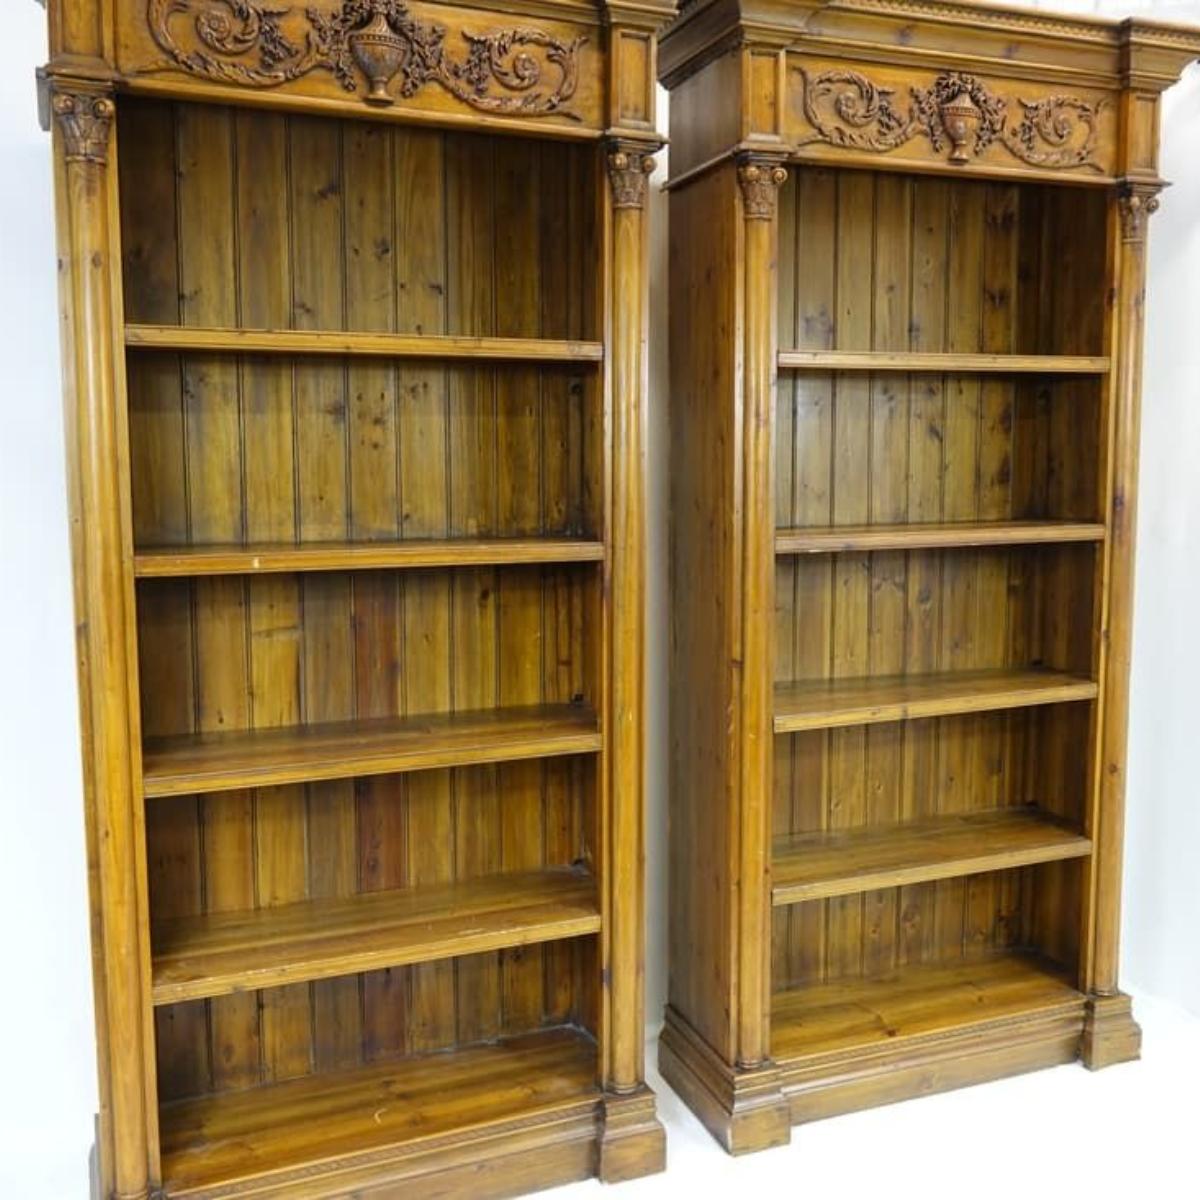 2 Amazing tall wood bookcases. They are a combination of rustic and fine woodwork. The details are beautiful. Second to none. Need at least 9' ceilings to use them. All The Touch-Ups Will Be Done Before Shipping Or Delivery(45.25